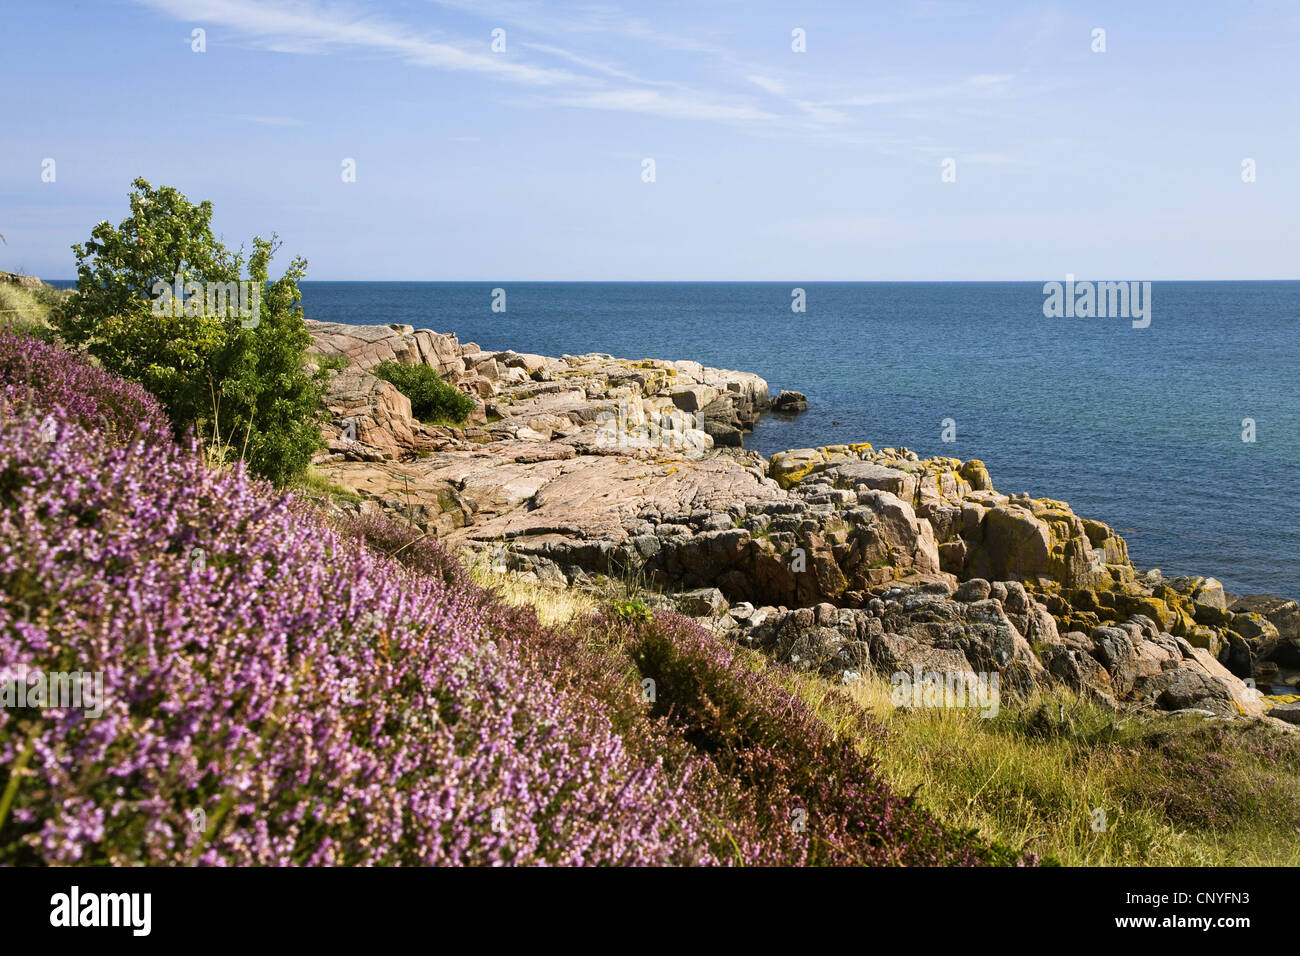 heather, ling (Calluna vulgaris), panoramic view at the sea from cliffs at the northern tip of the island, Denmark, Bornholm, Hammeren, Hammer Odde Stock Photo